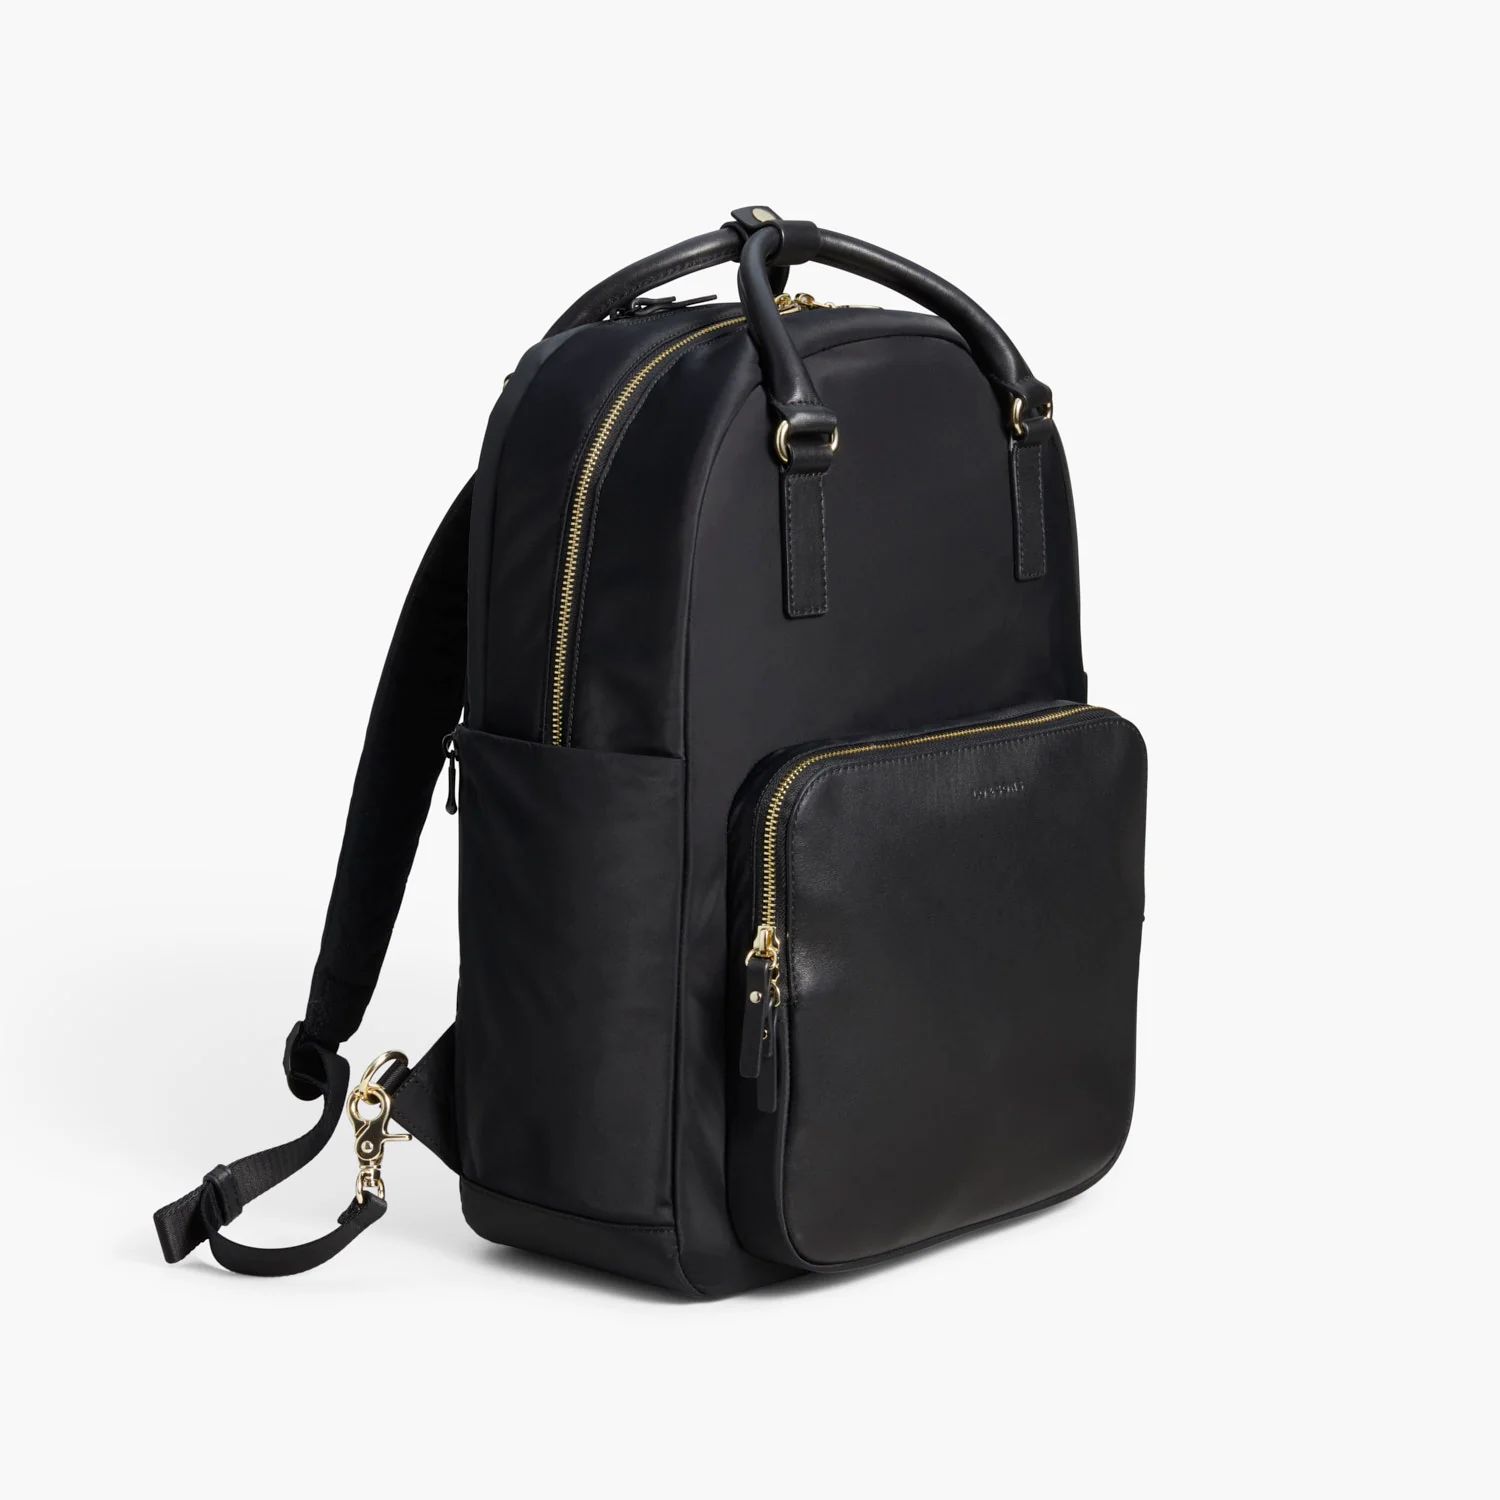 The Rowledge - Convertible Nylon Backpack Tote in Black with Gold Hardware and Grey Interior | Lo & Sons | Lo & Sons